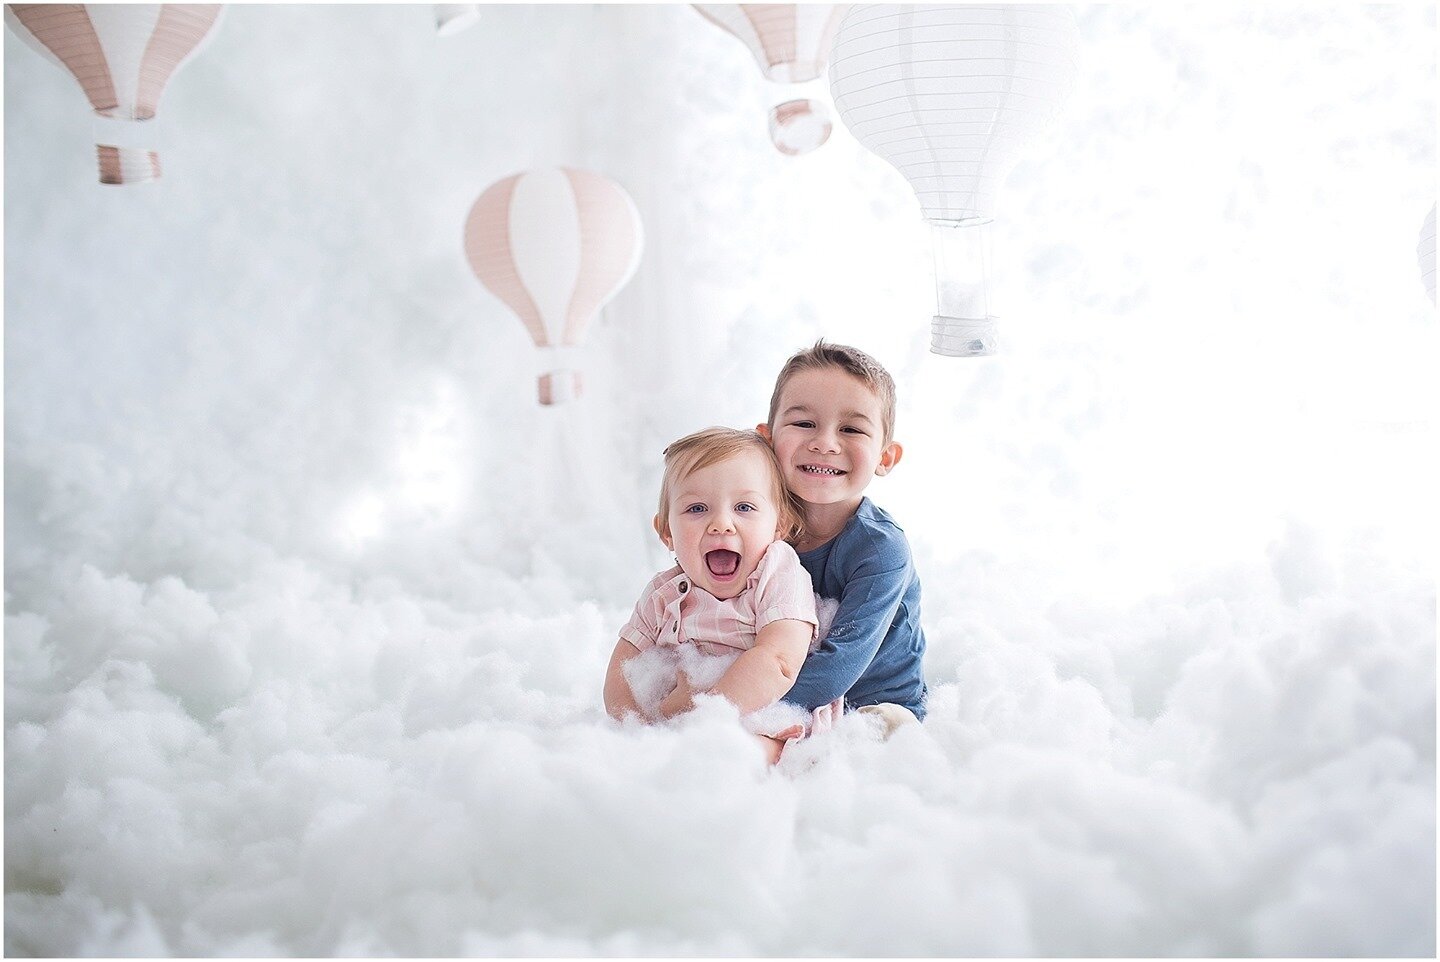 I mean, let's be honest. We all want to lay in the clouds and gaze at a sky full of hot air balloons, right? ⁠
⁠
⁠
⁠
⁠
#realsmiles #becausemomentsmatter #emilyhallphotography #documentyourlife #documentyourlove #familyportraits